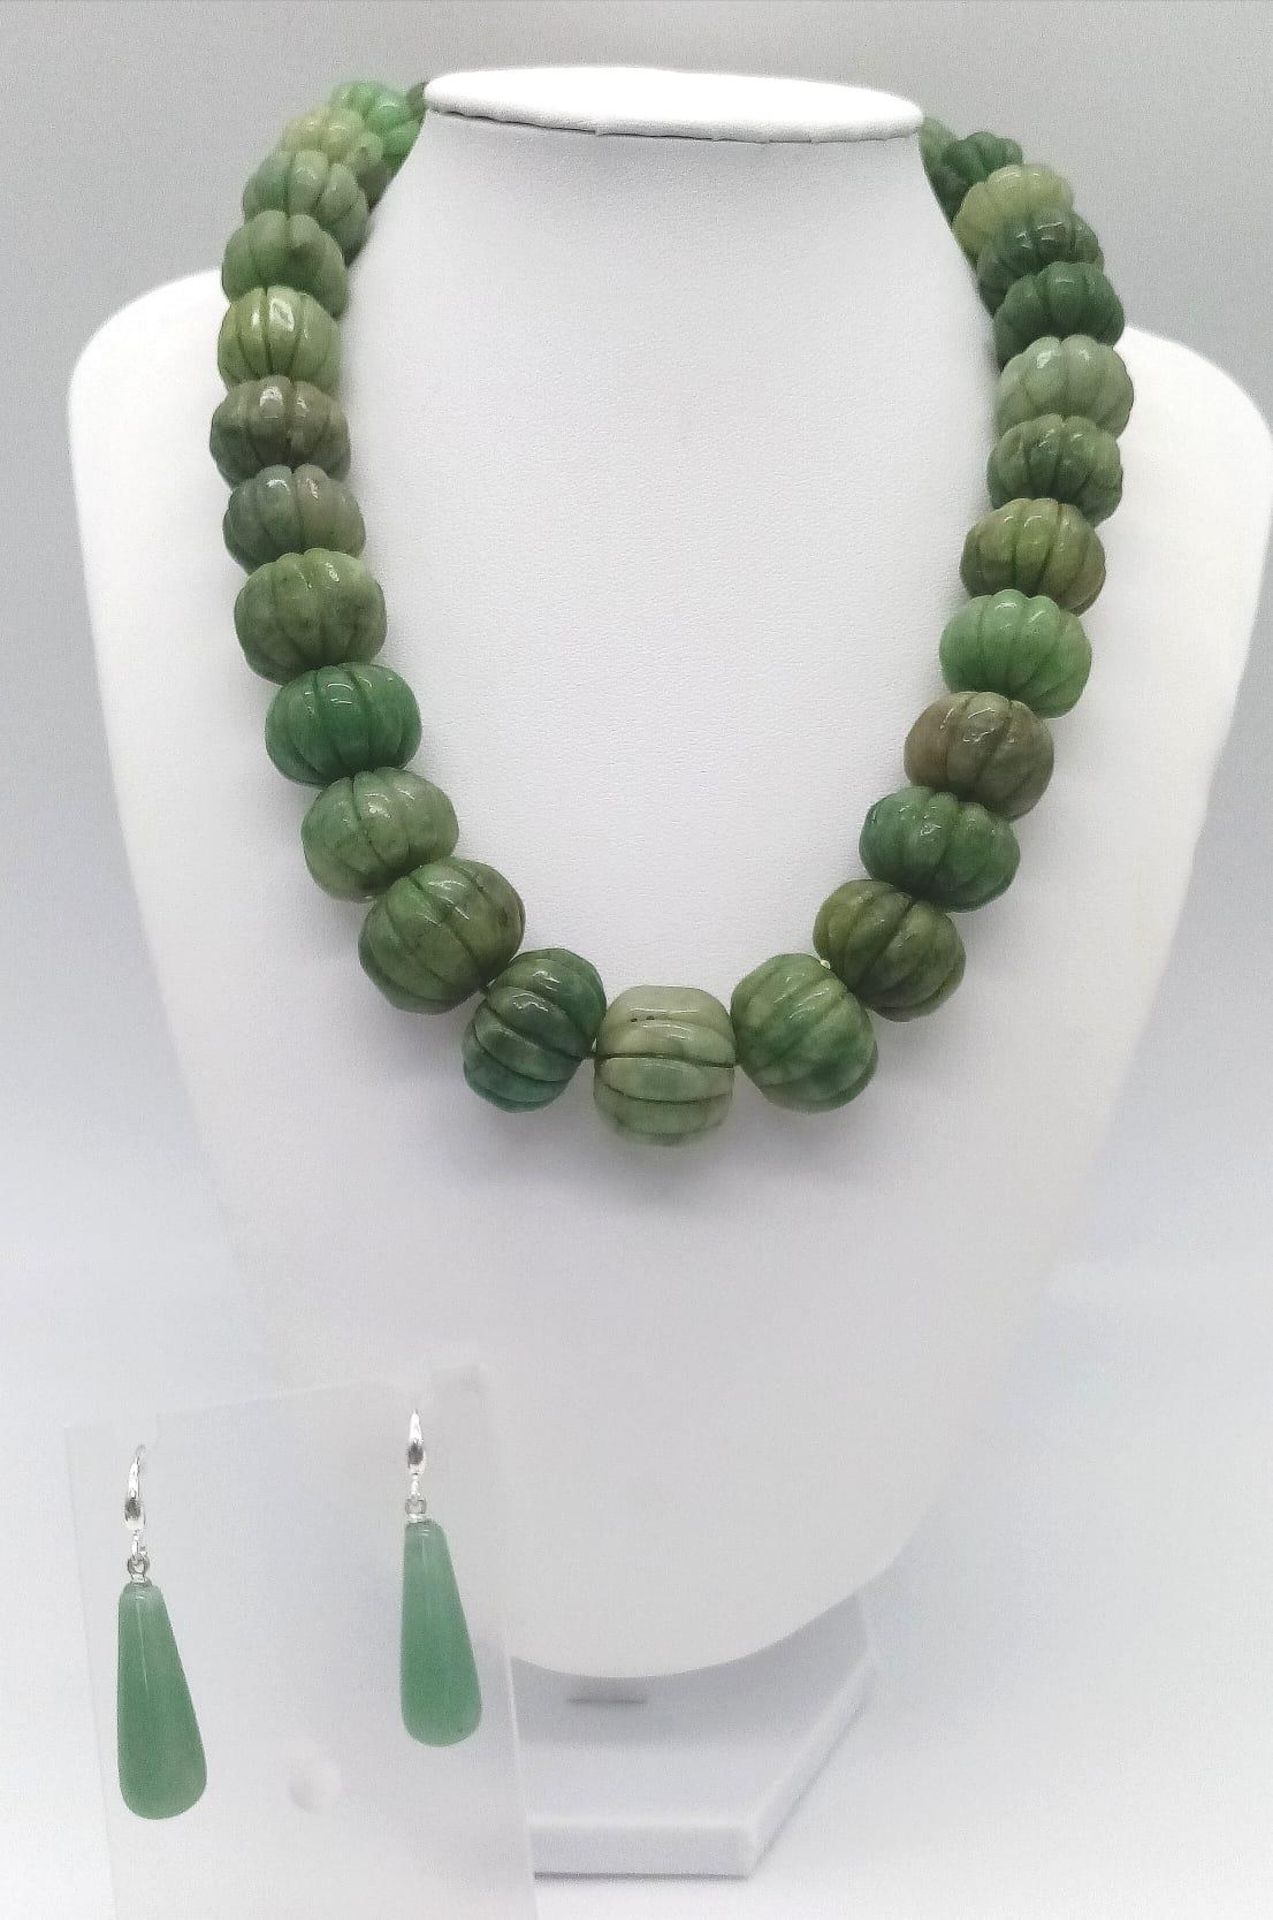 A Vintage Pumpkin Jade Necklace with a Pair of Jade Drop Earrings. Necklace - 42cm